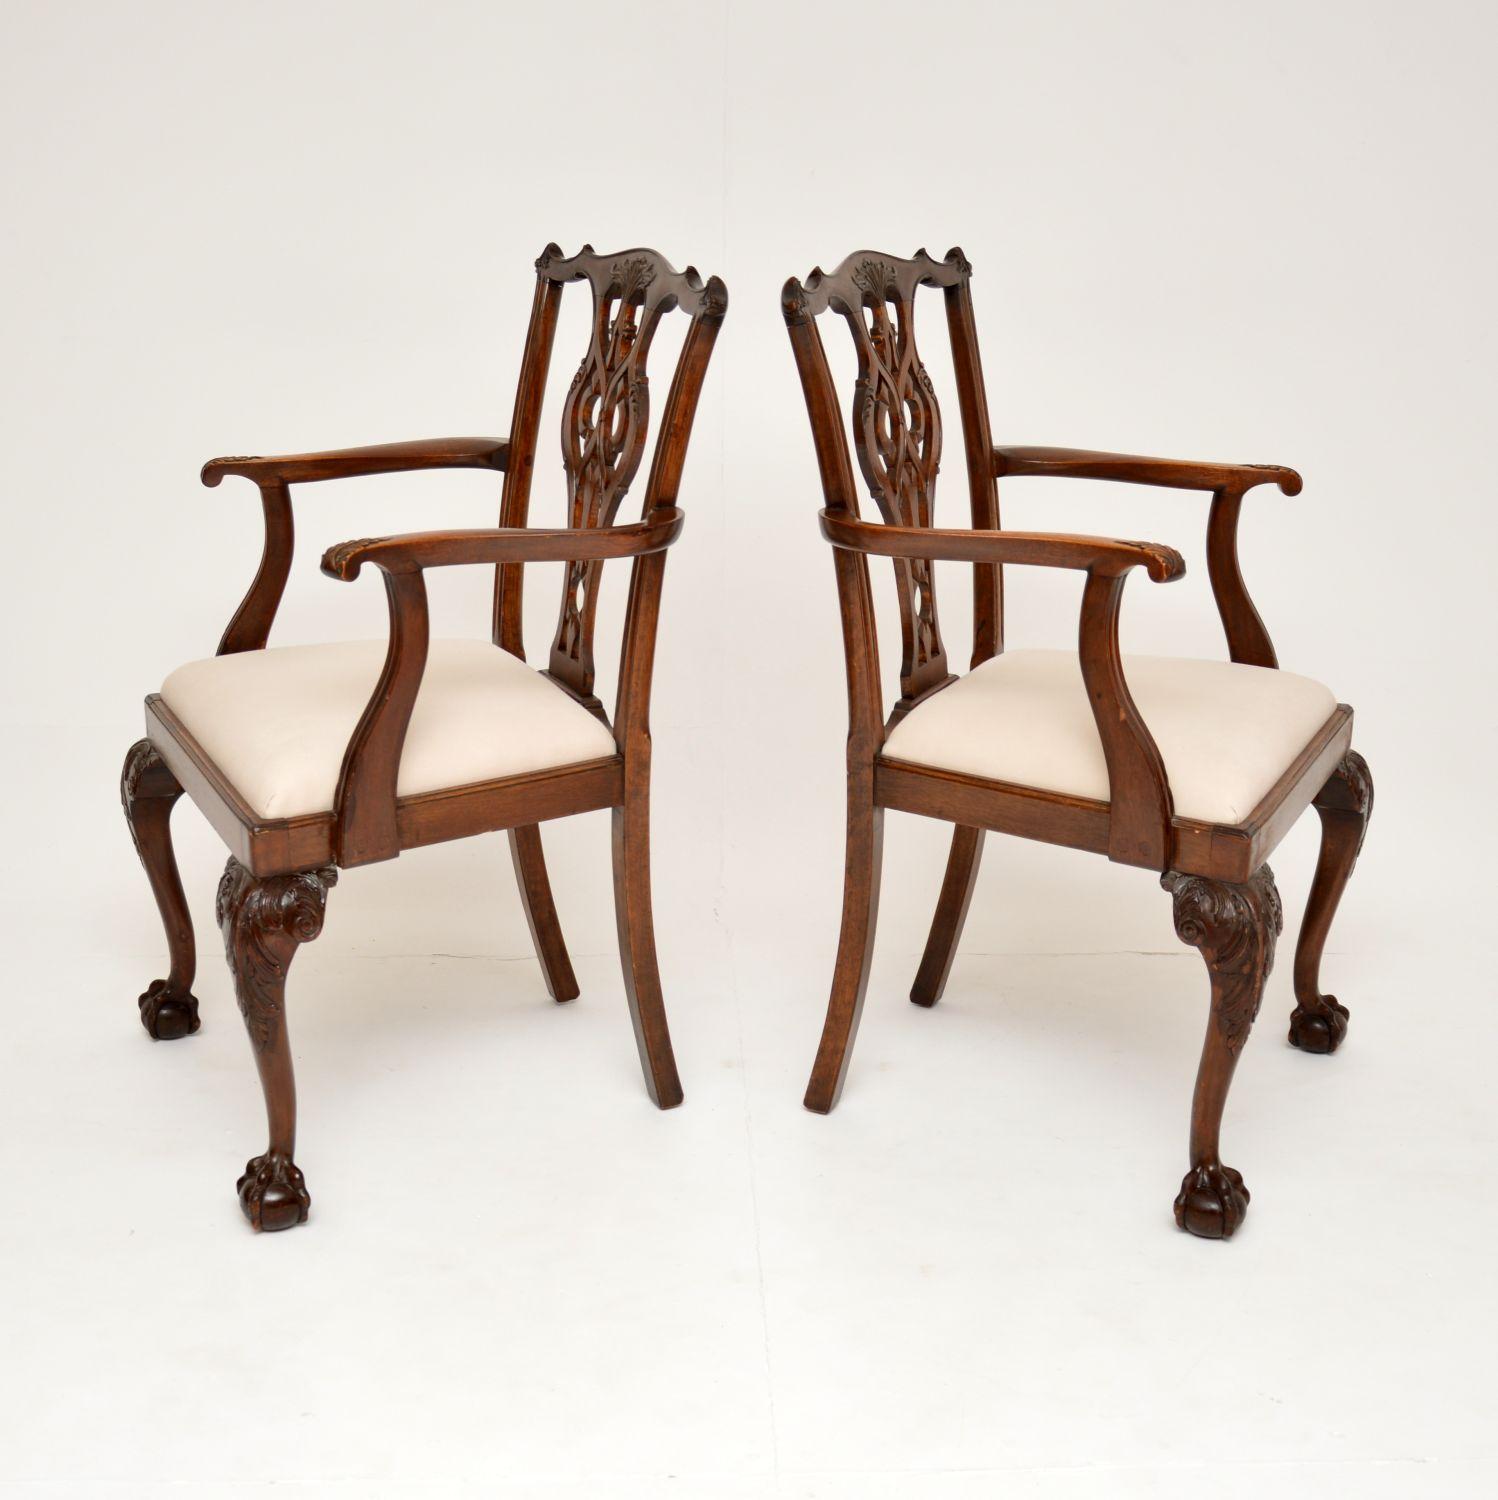 English Pair of Antique Chippendale Revival Carver Armchairs